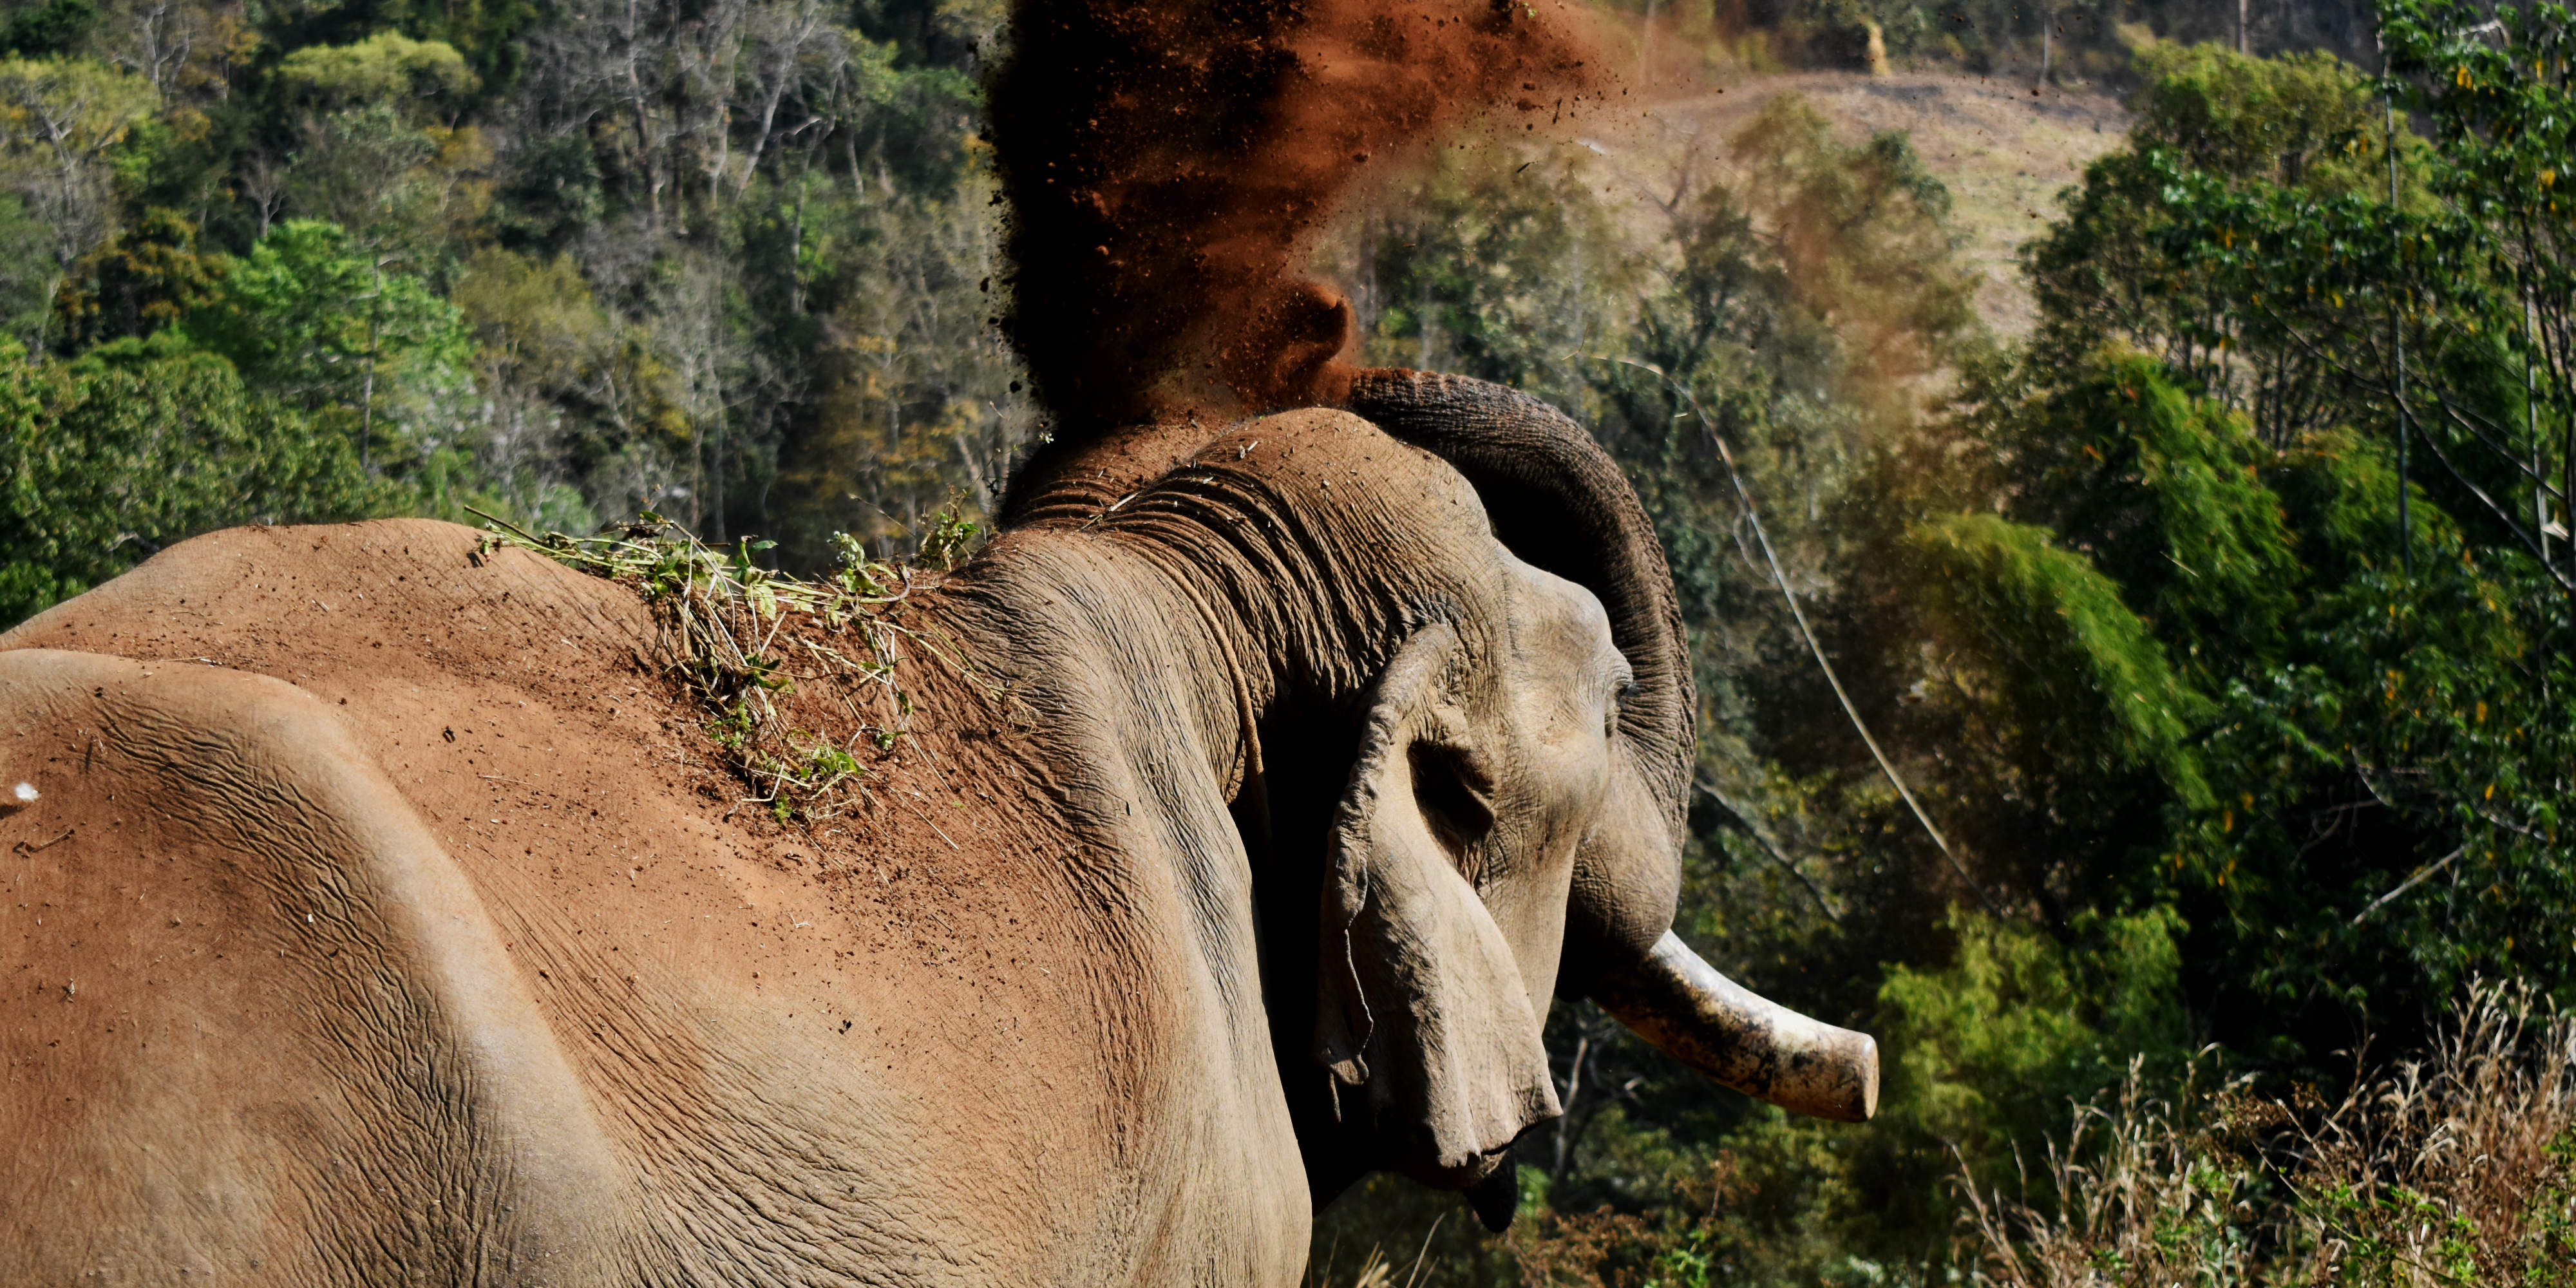 An elephant in Thailand flings dirt onto its back. After being reintegrated into the natural forest habitat, these elephants begin to display this kind of natural behaviour.